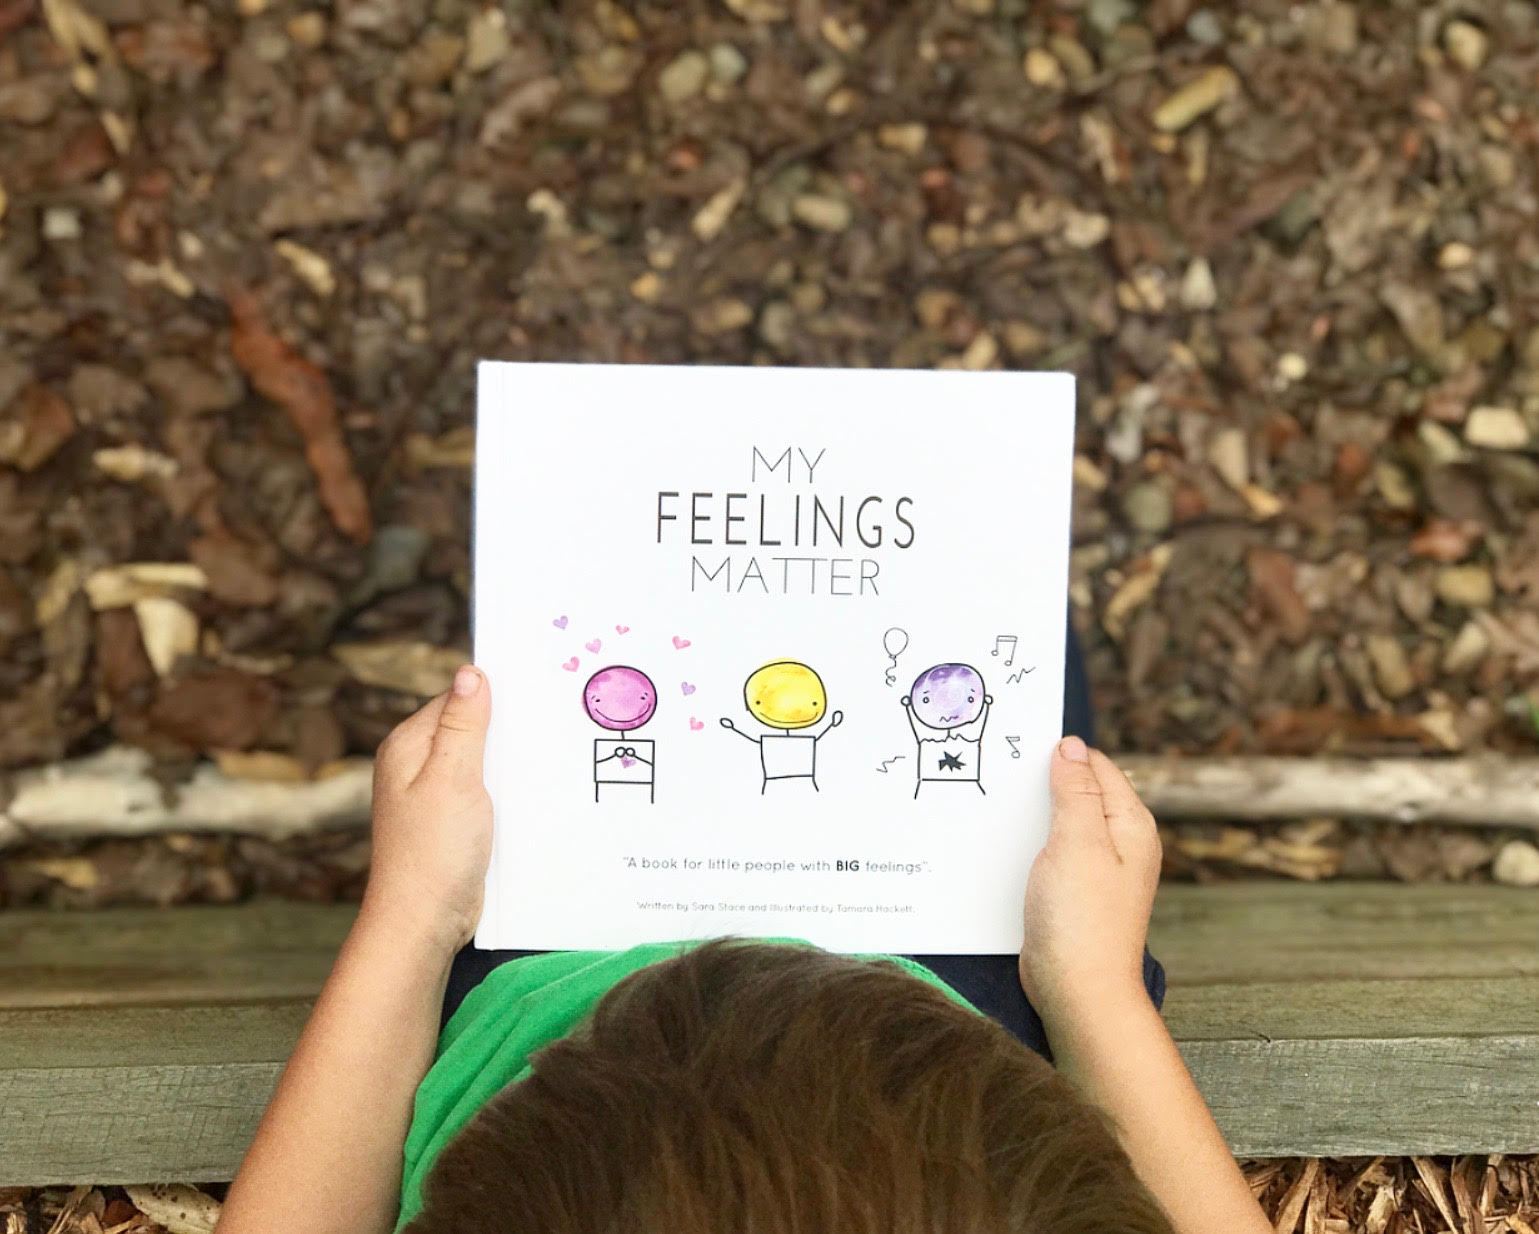 My Feelings Matter – A book for little people with BIG feelings